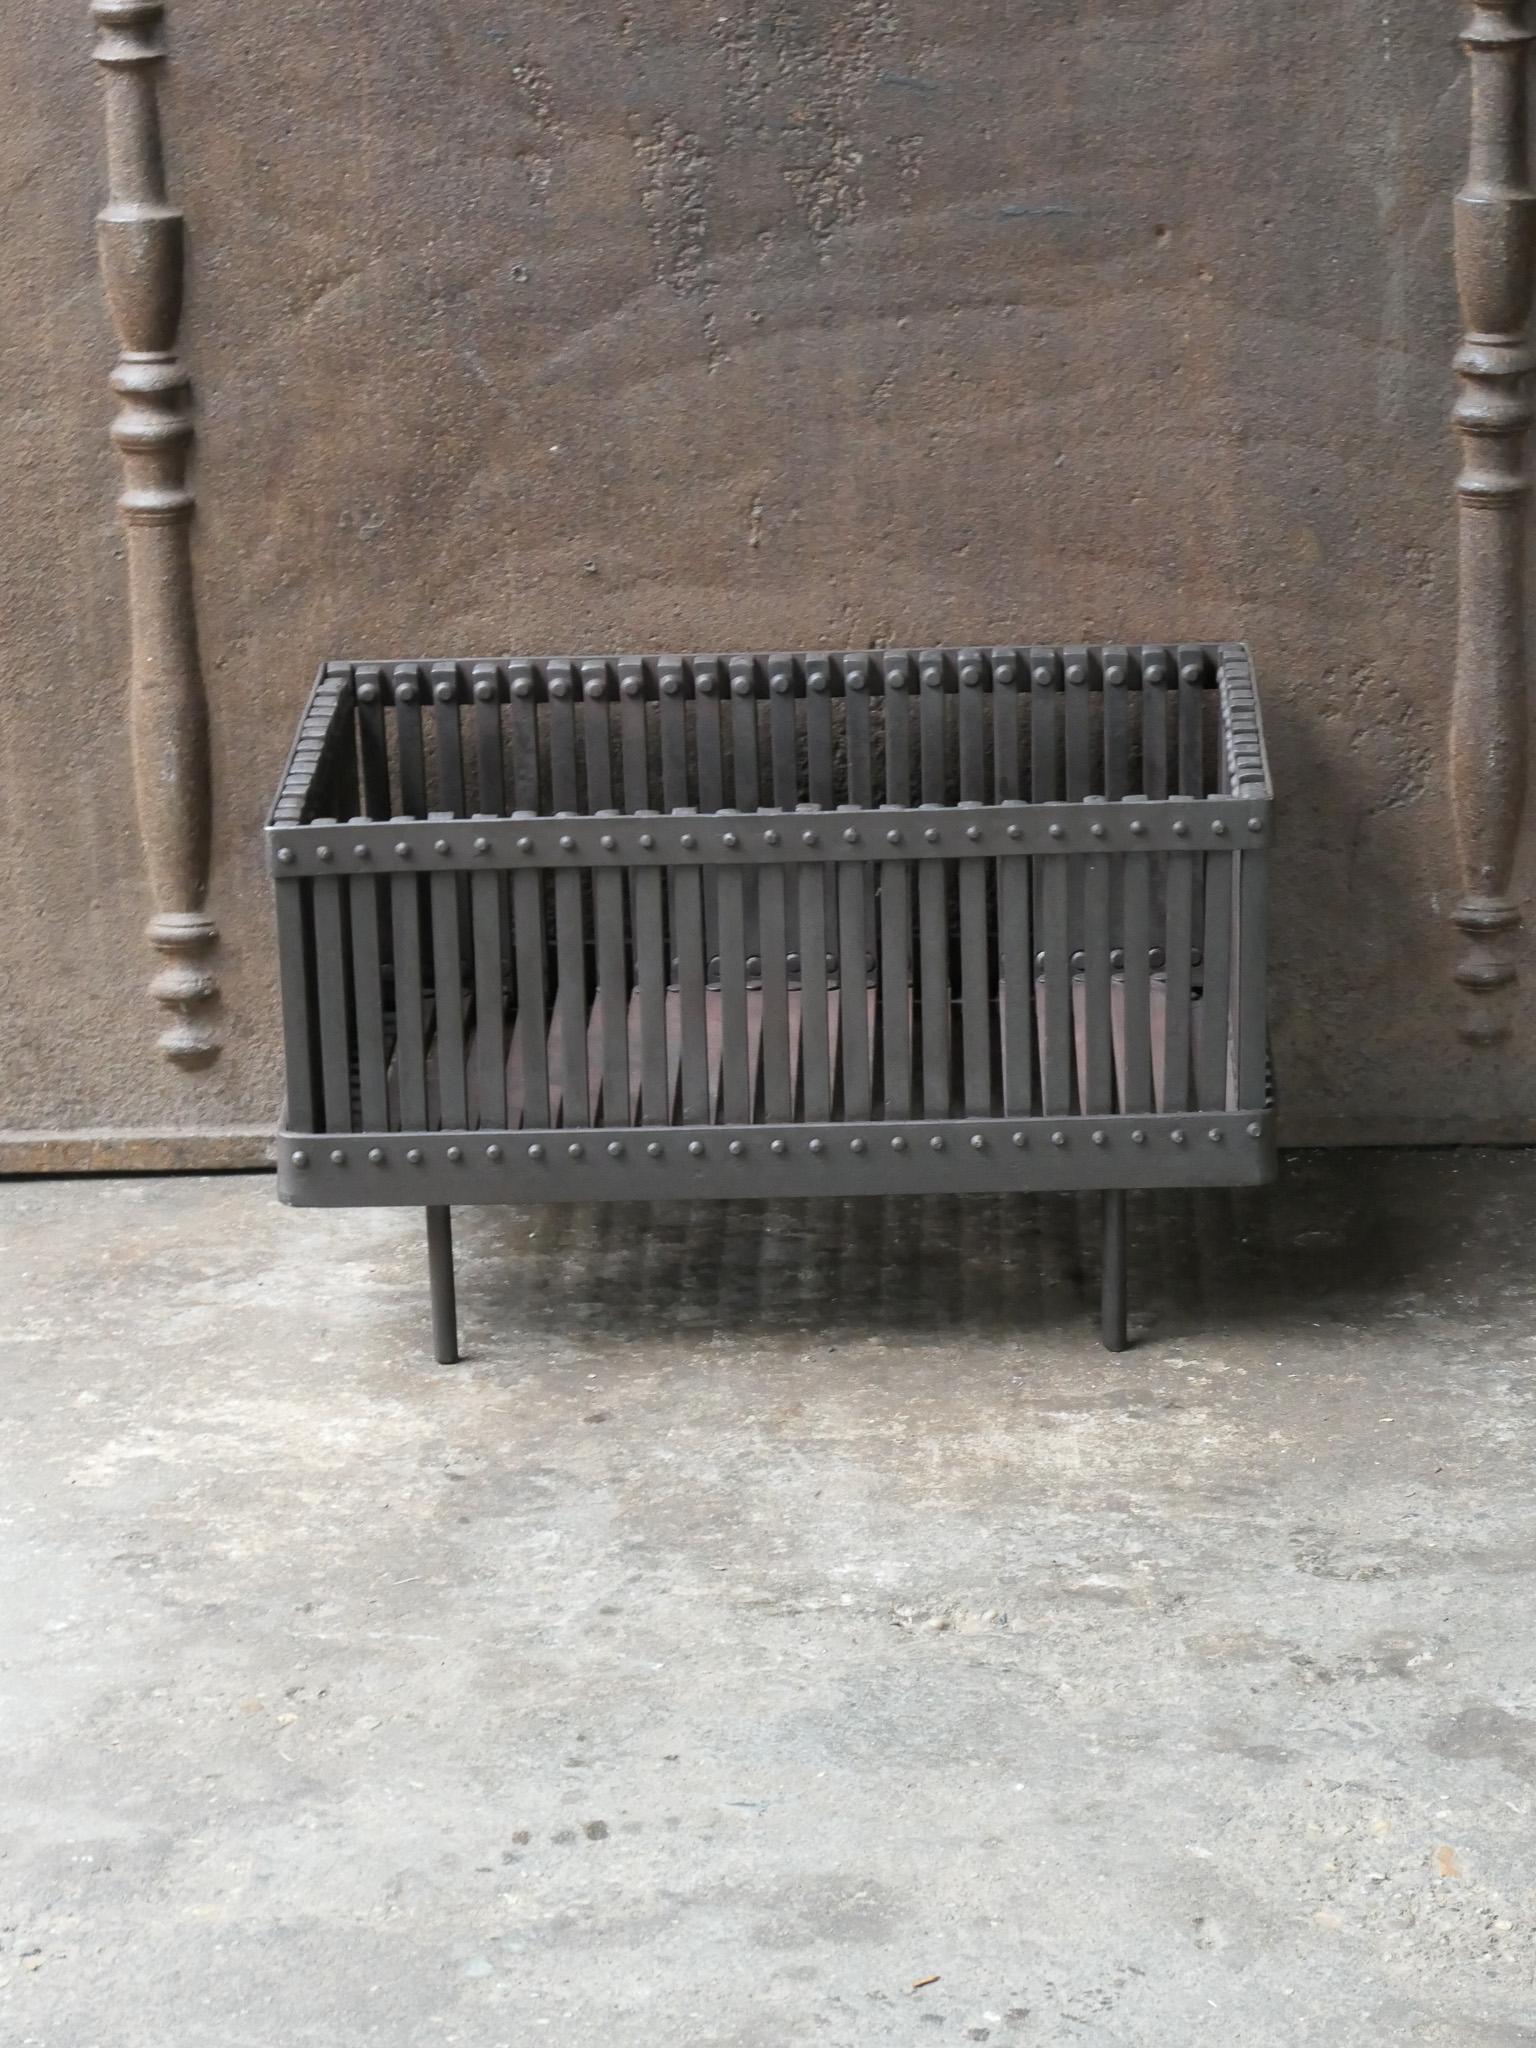 English 20th century modernist fireplace basket or fire basket. The fireplace grate is made of wrought iron.

















   